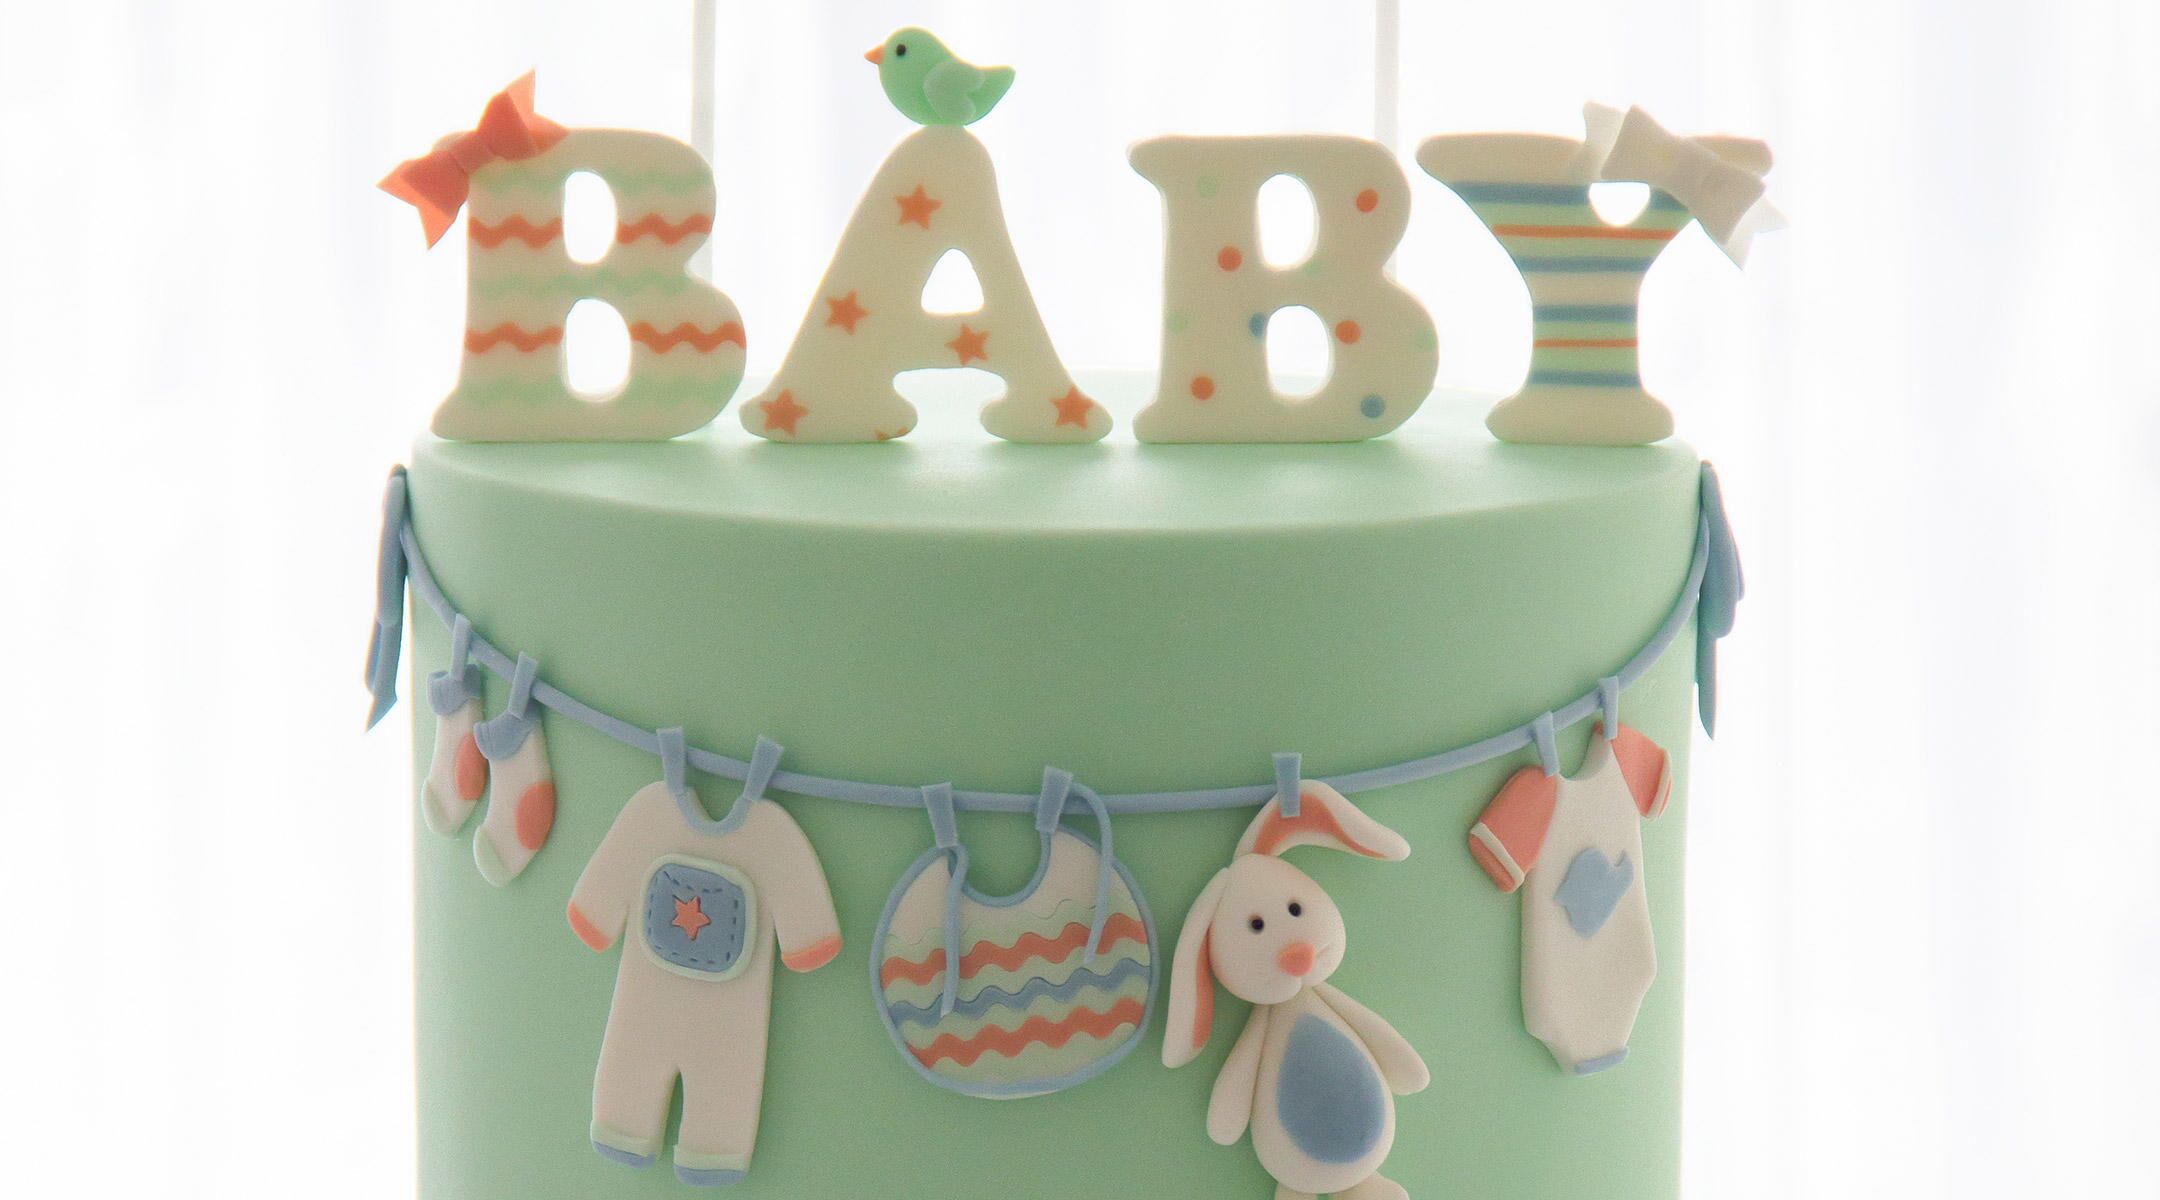 Fondant Baby Shower Cake Topper with Blocks, Letters in Hearts